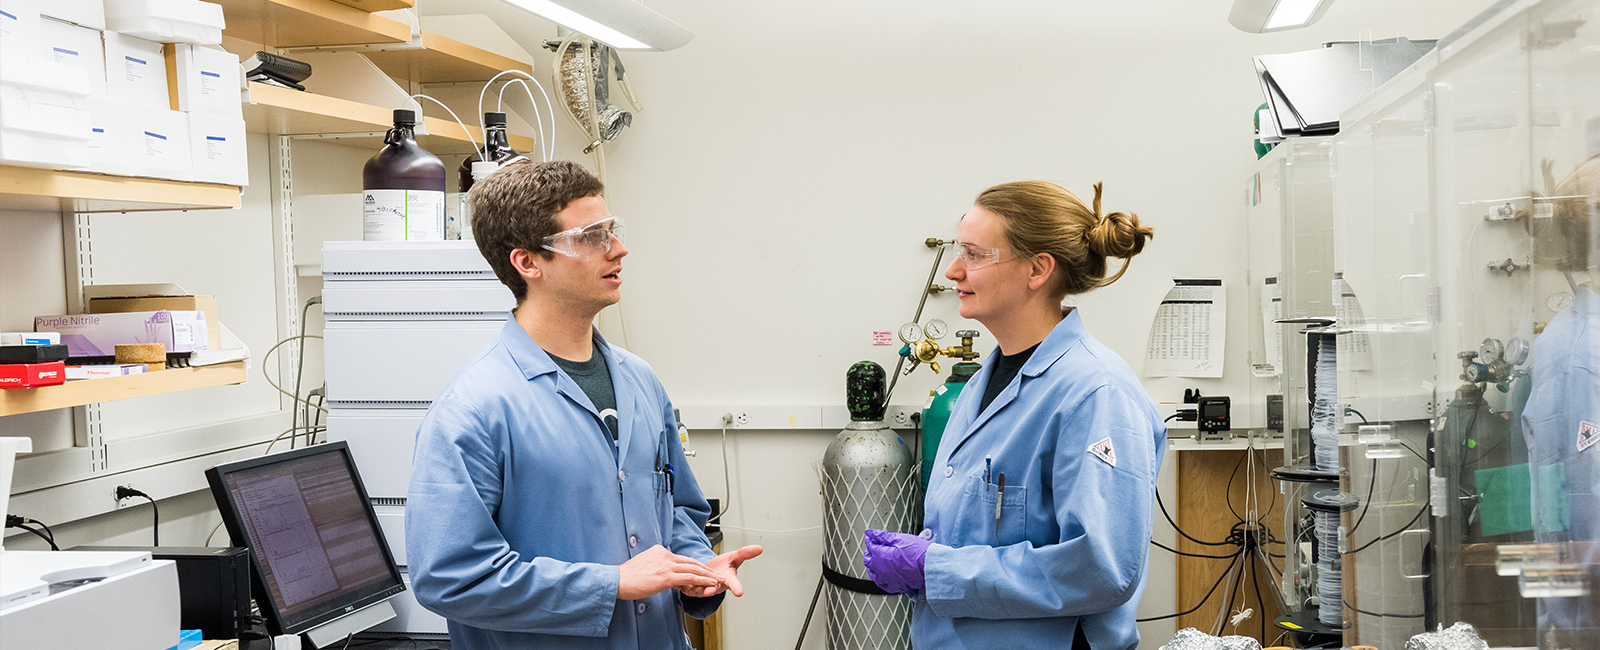 Two graduate students talk about their research in a lab.